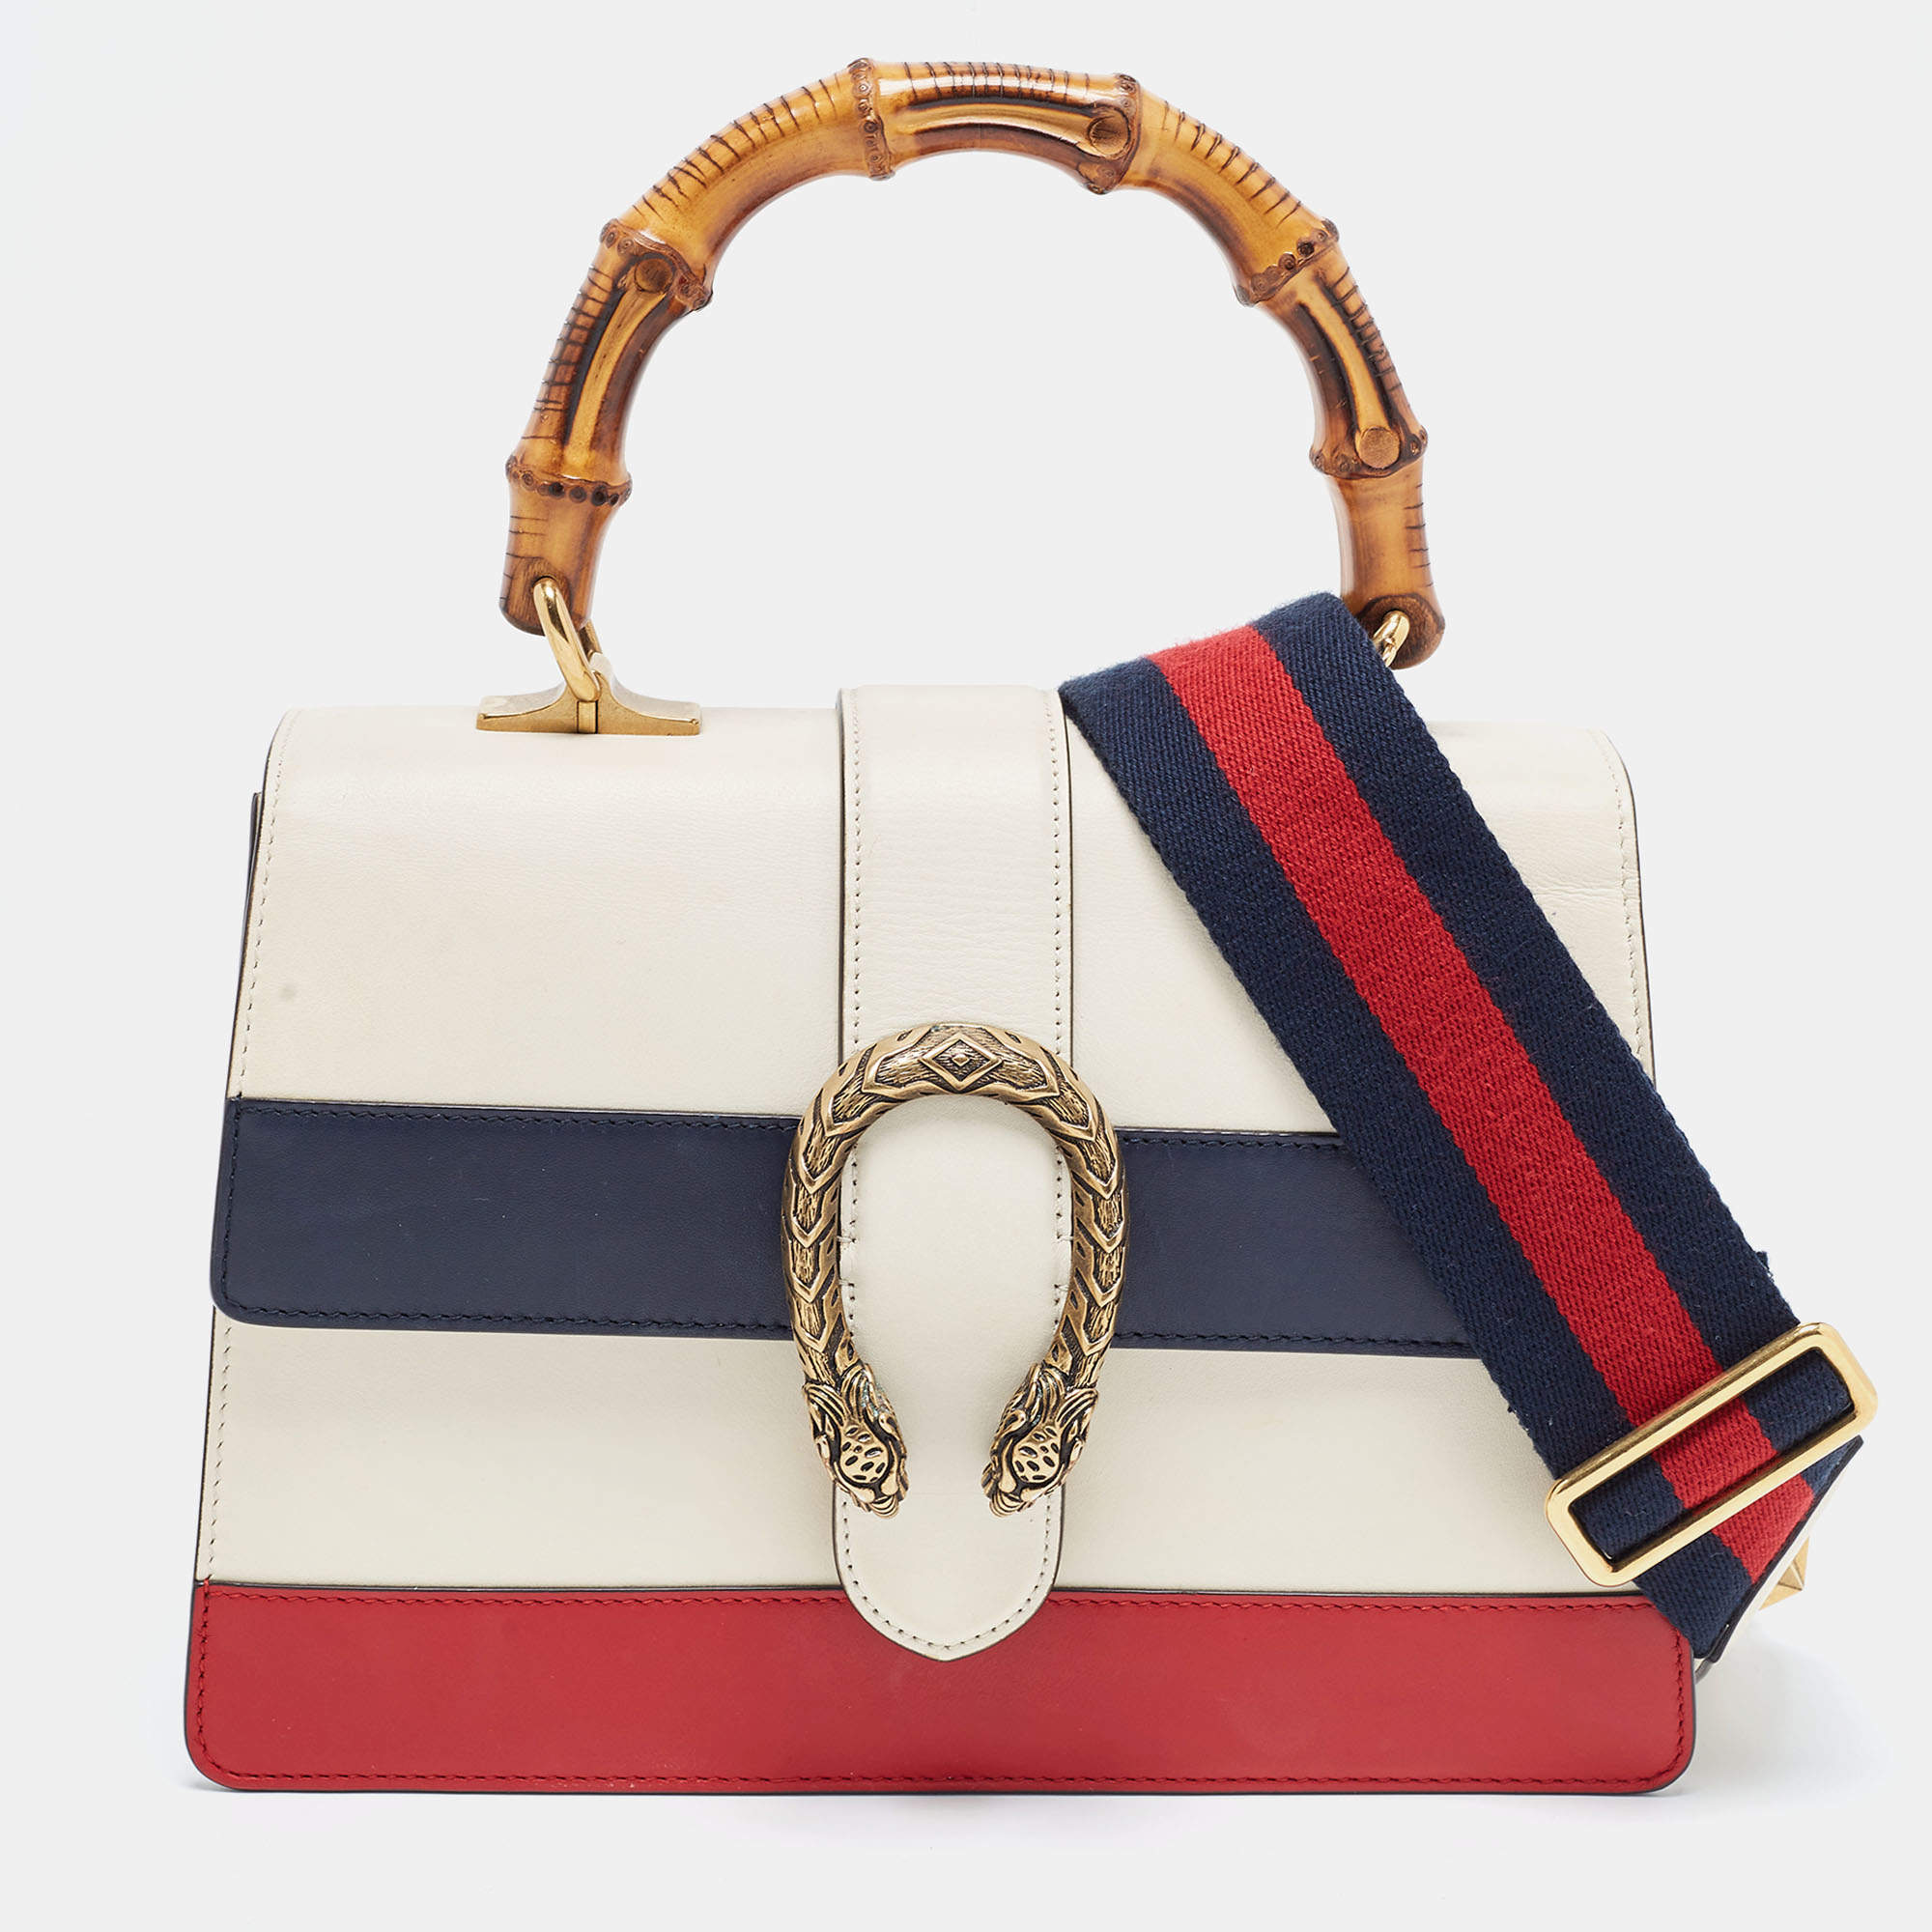 GUCCI Dionysus White Blue Red Medium Bamboo Top Handle Leather Bag 448075